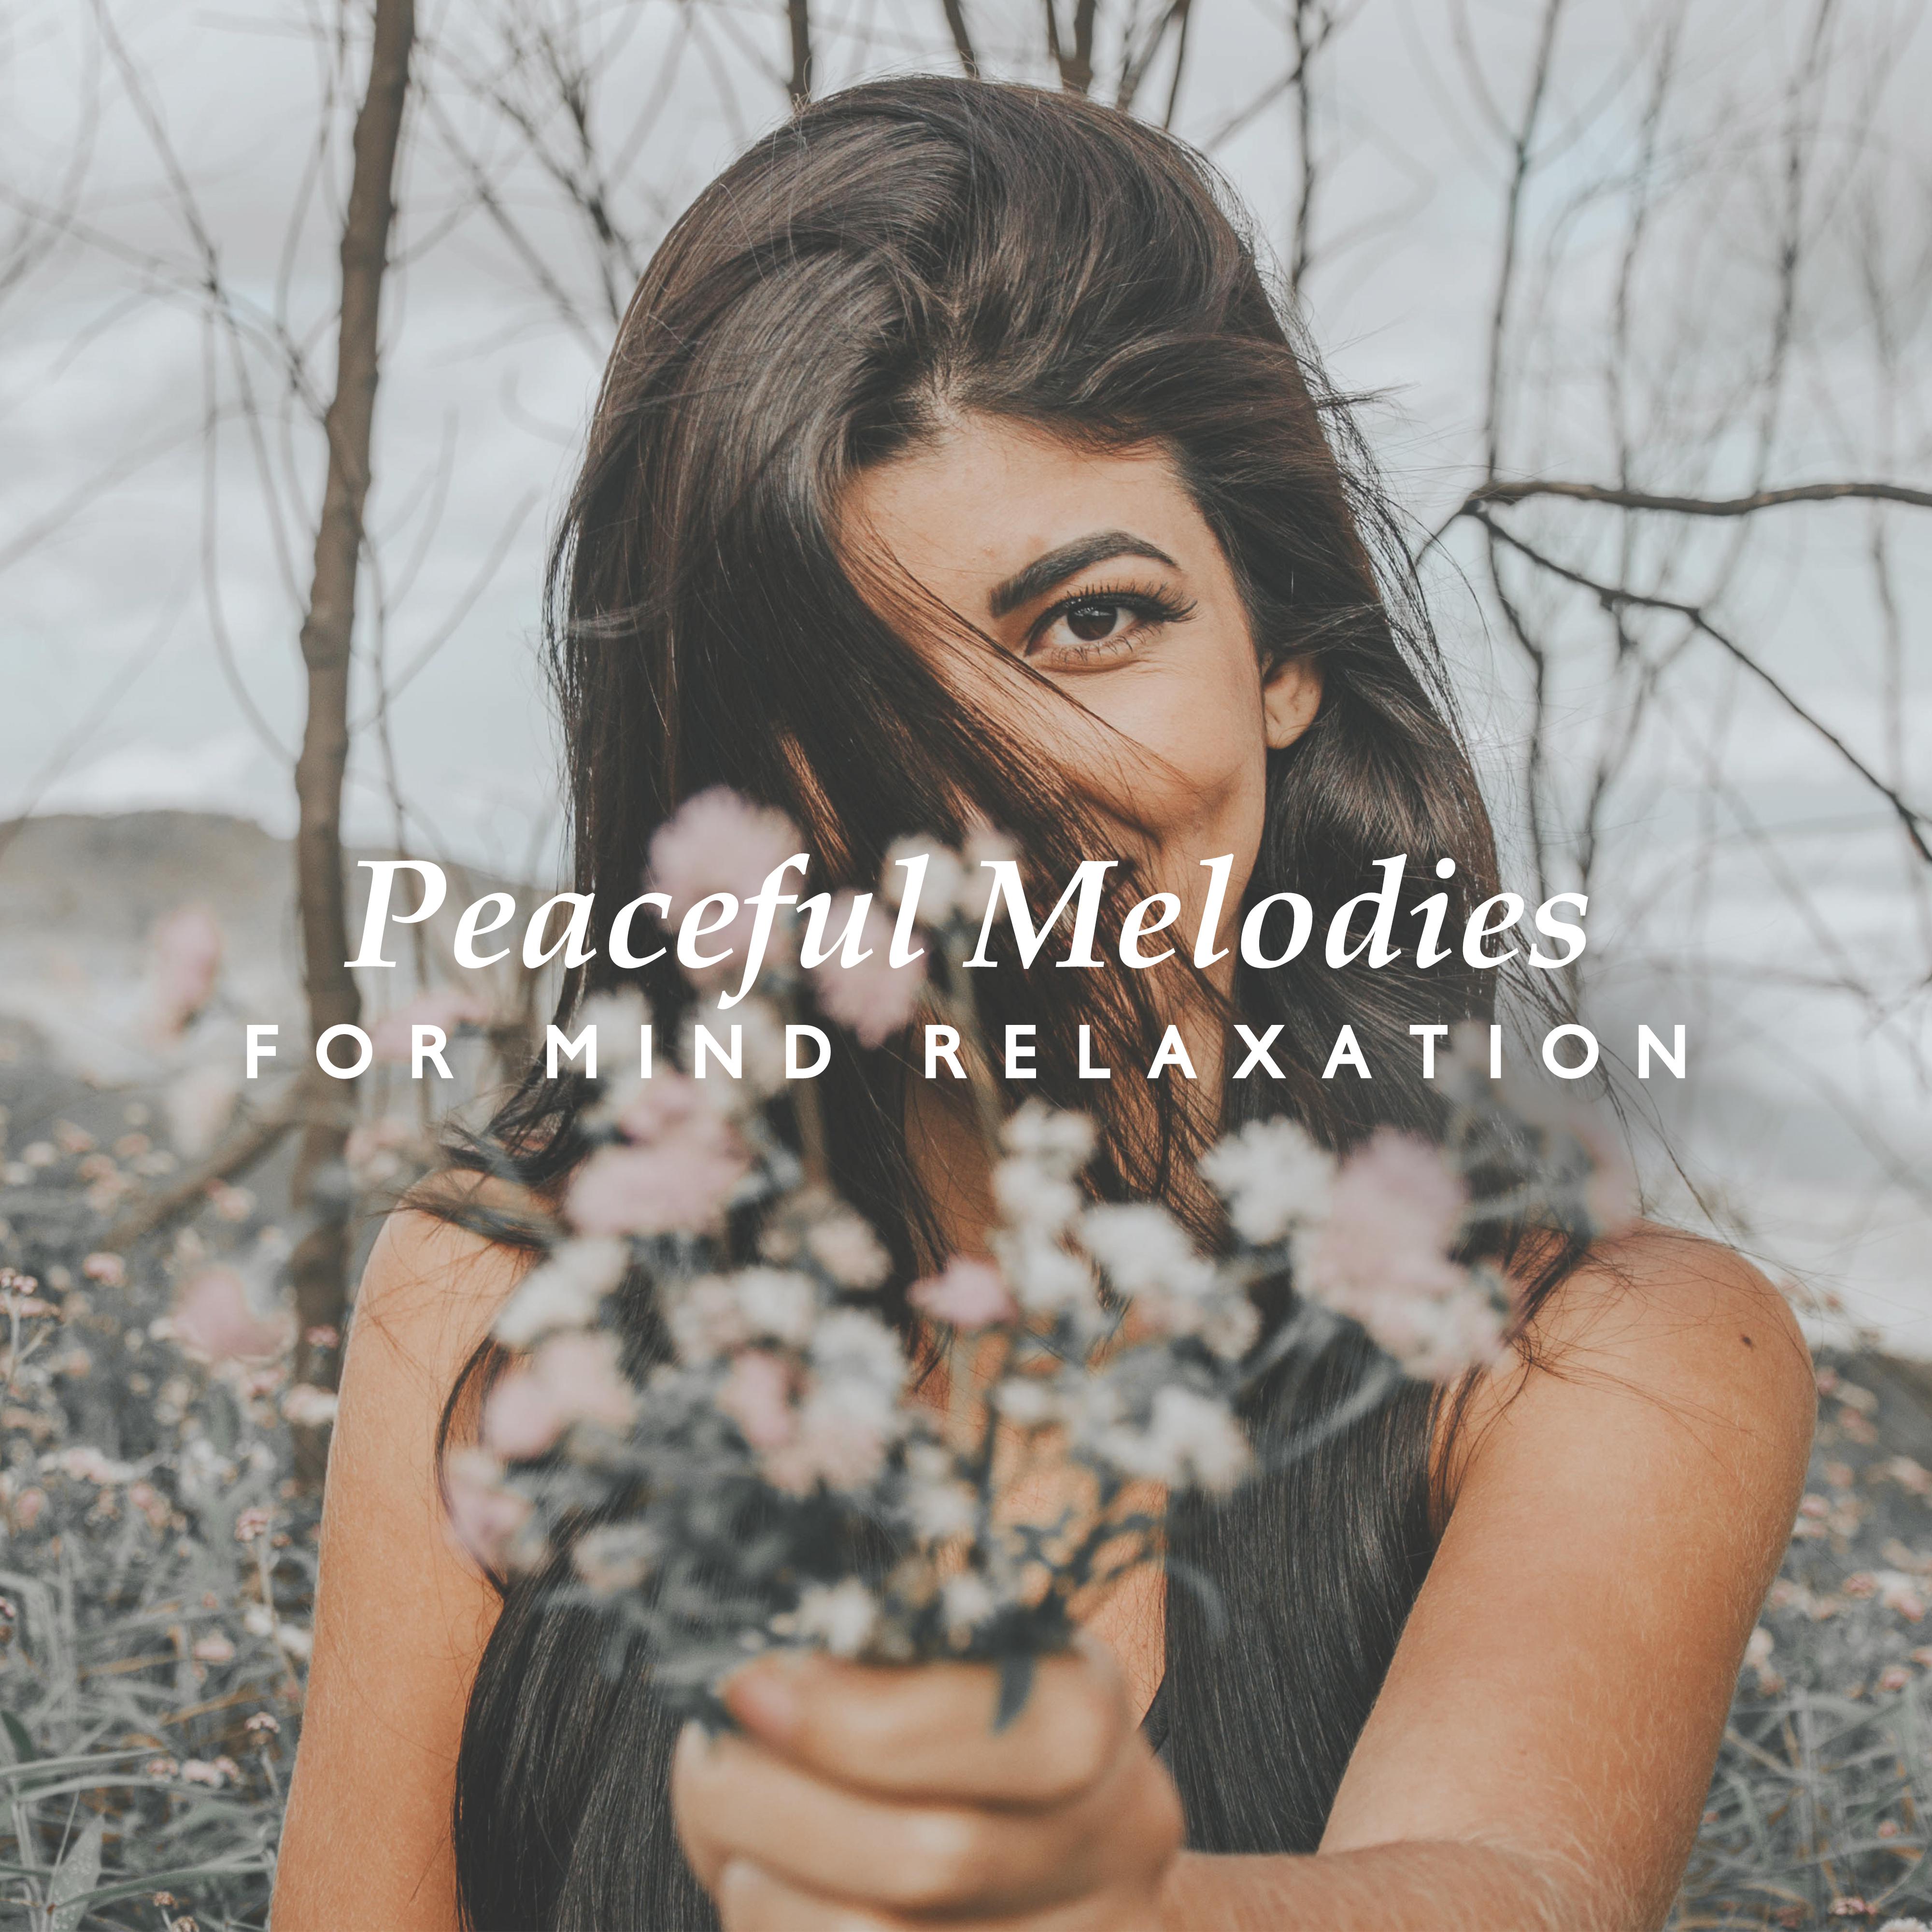 Peaceful Melodies for Mind Relaxation